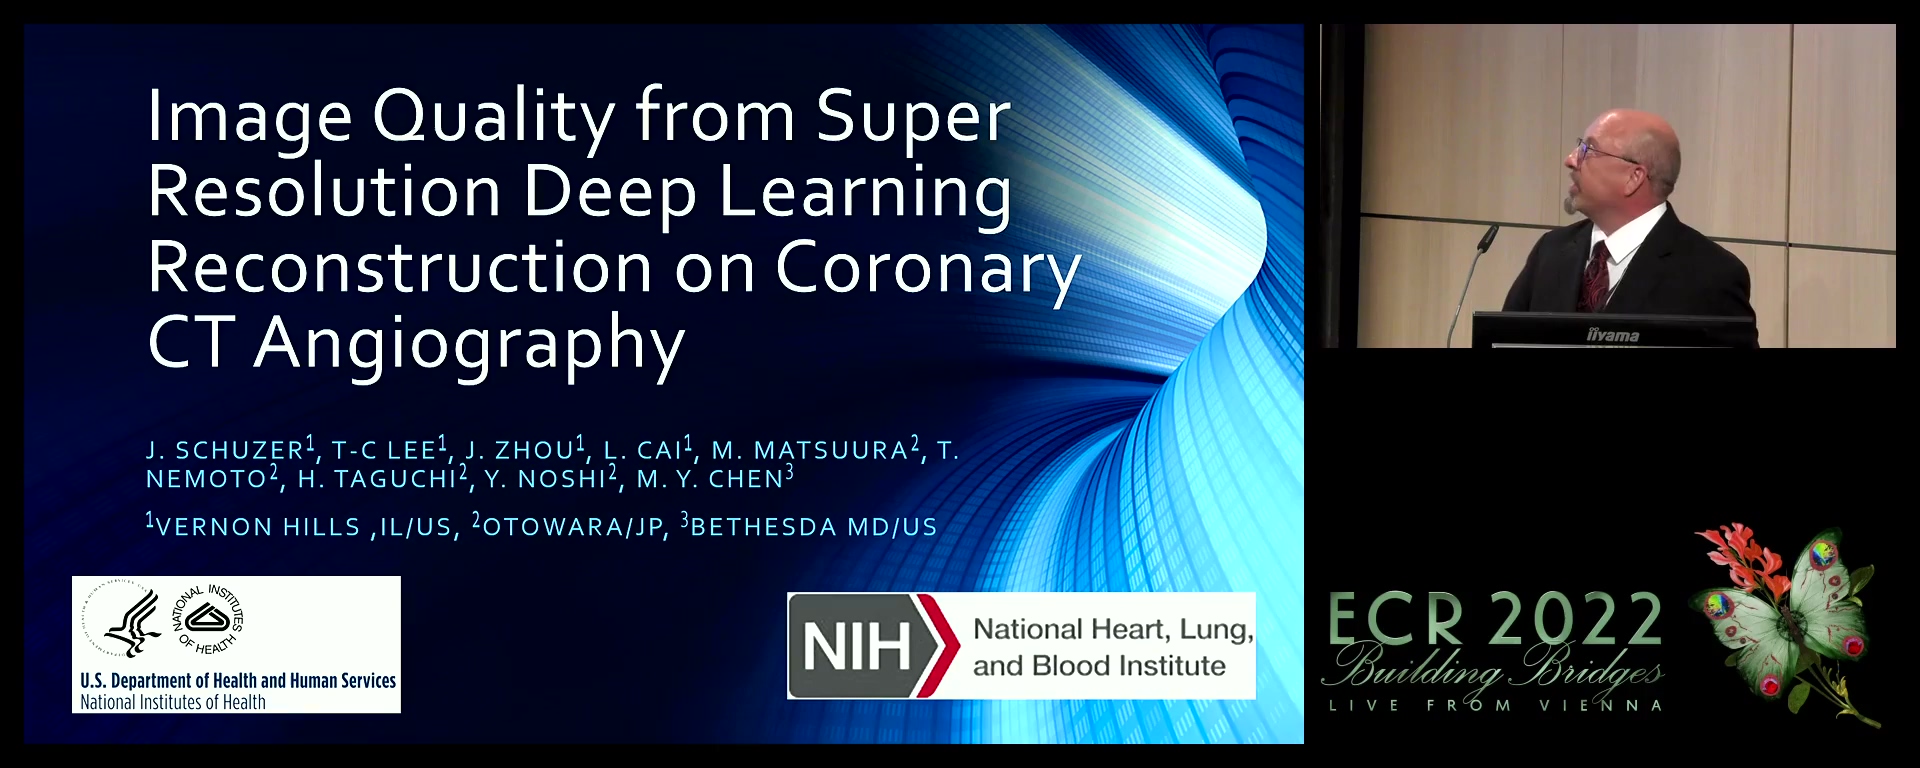 Image quality from super resolution deep learning reconstruction on coronary CT angiography - John Schuzer, Wheaton / US